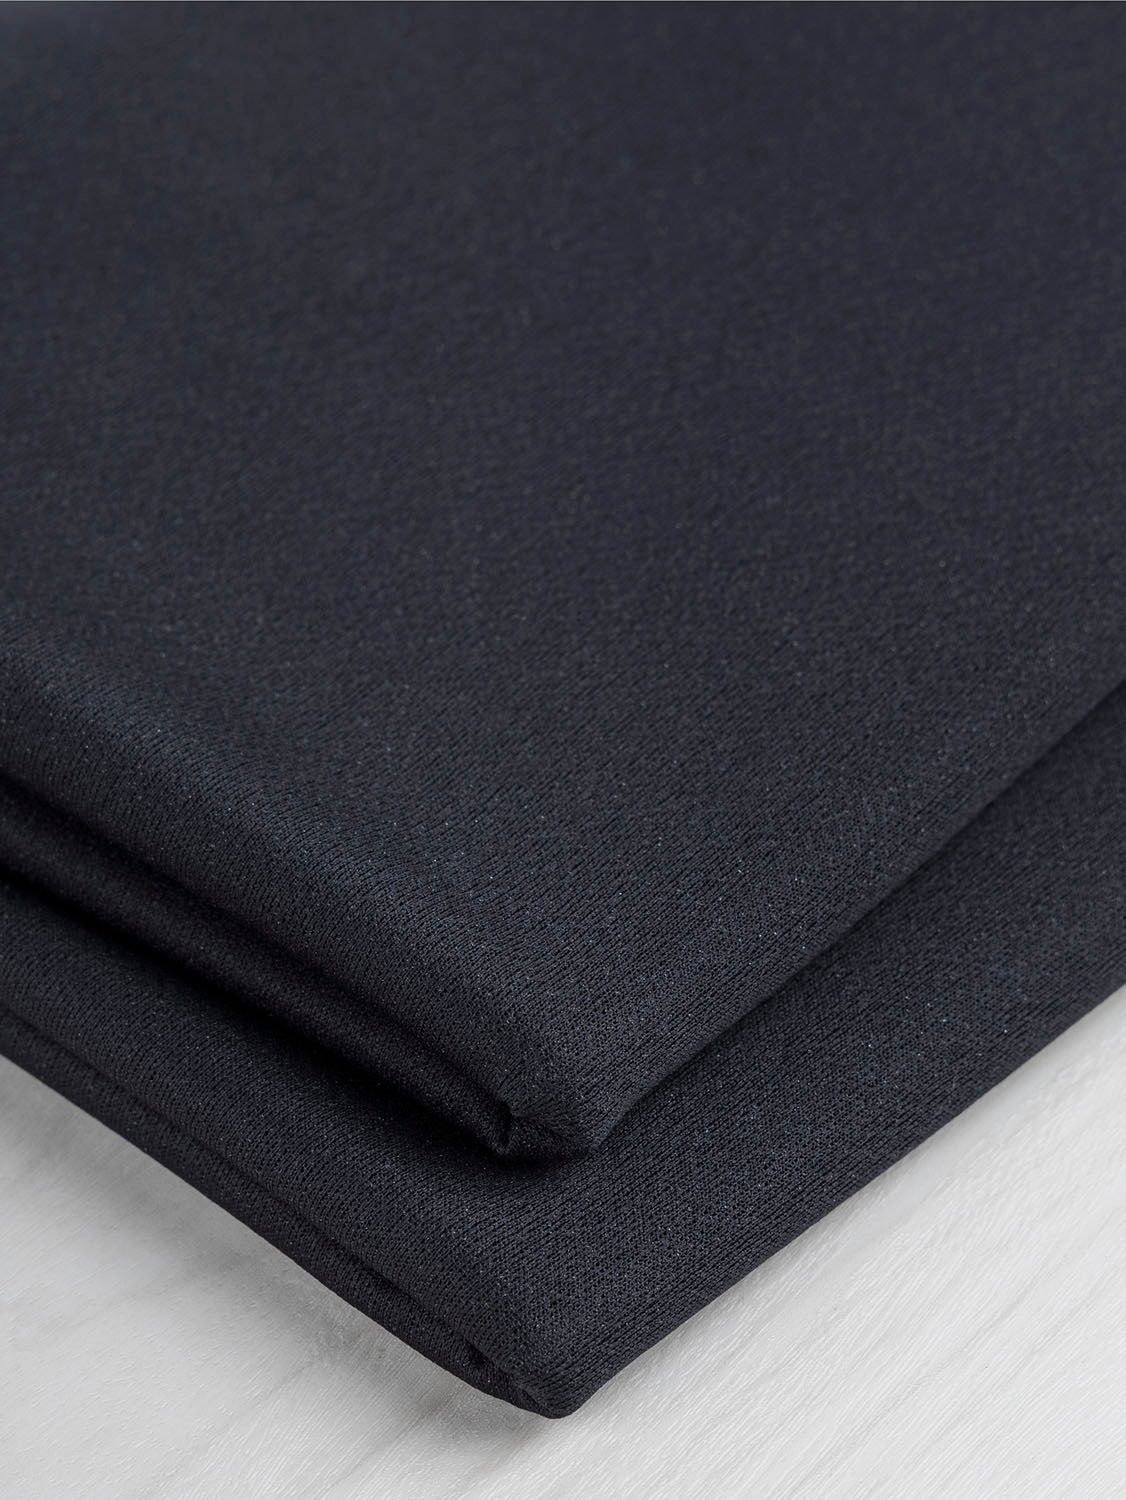 Recycled Midweight Stretch Interfacing - Black | Core Fabrics